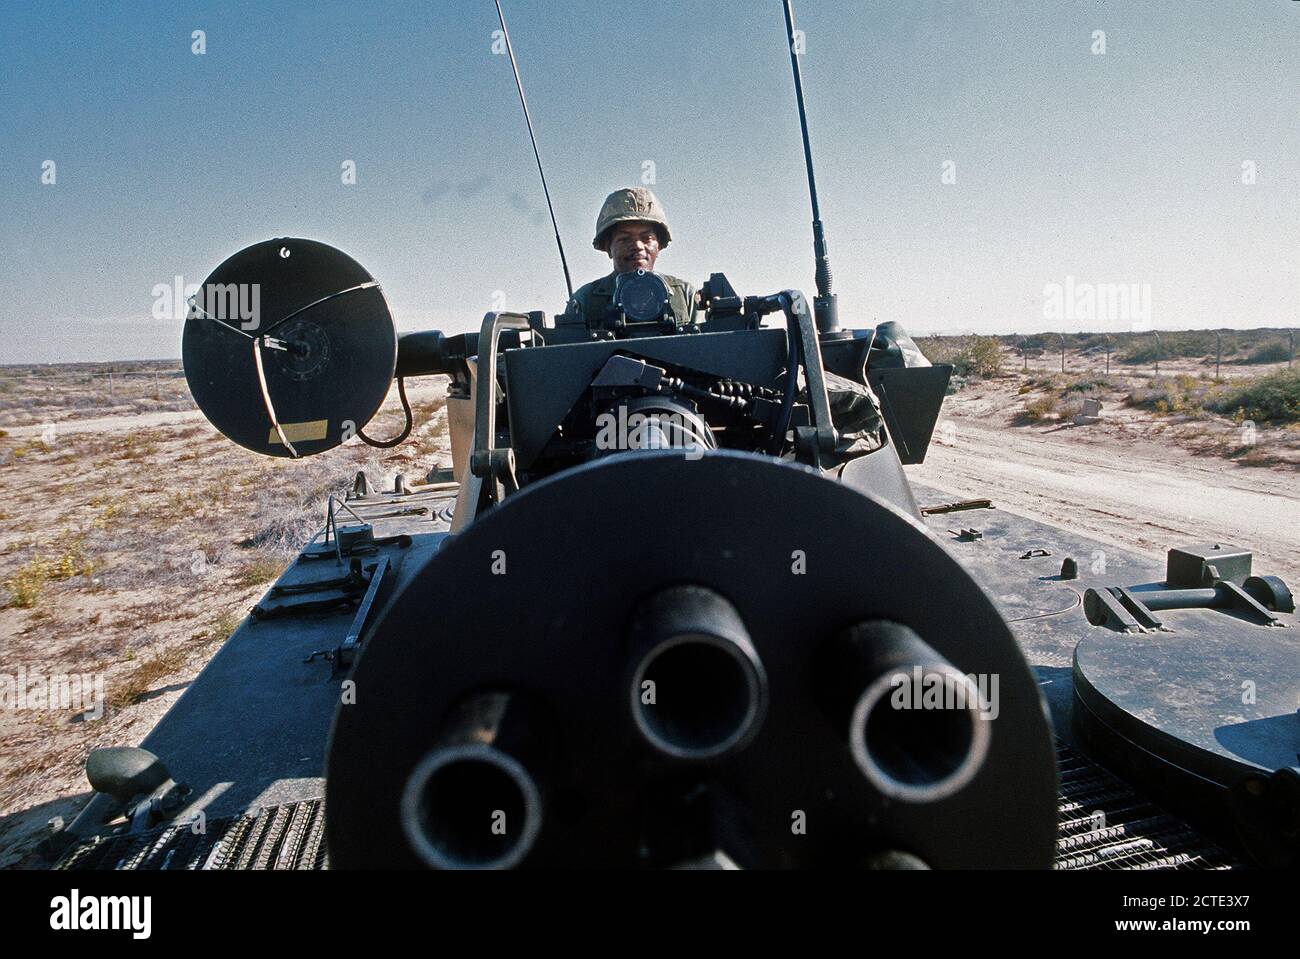 1972 - A U.S. Army soldier mans an M-163A1 Vulcan self-propelled anti-aircraft gun during a field exercise. Stock Photo